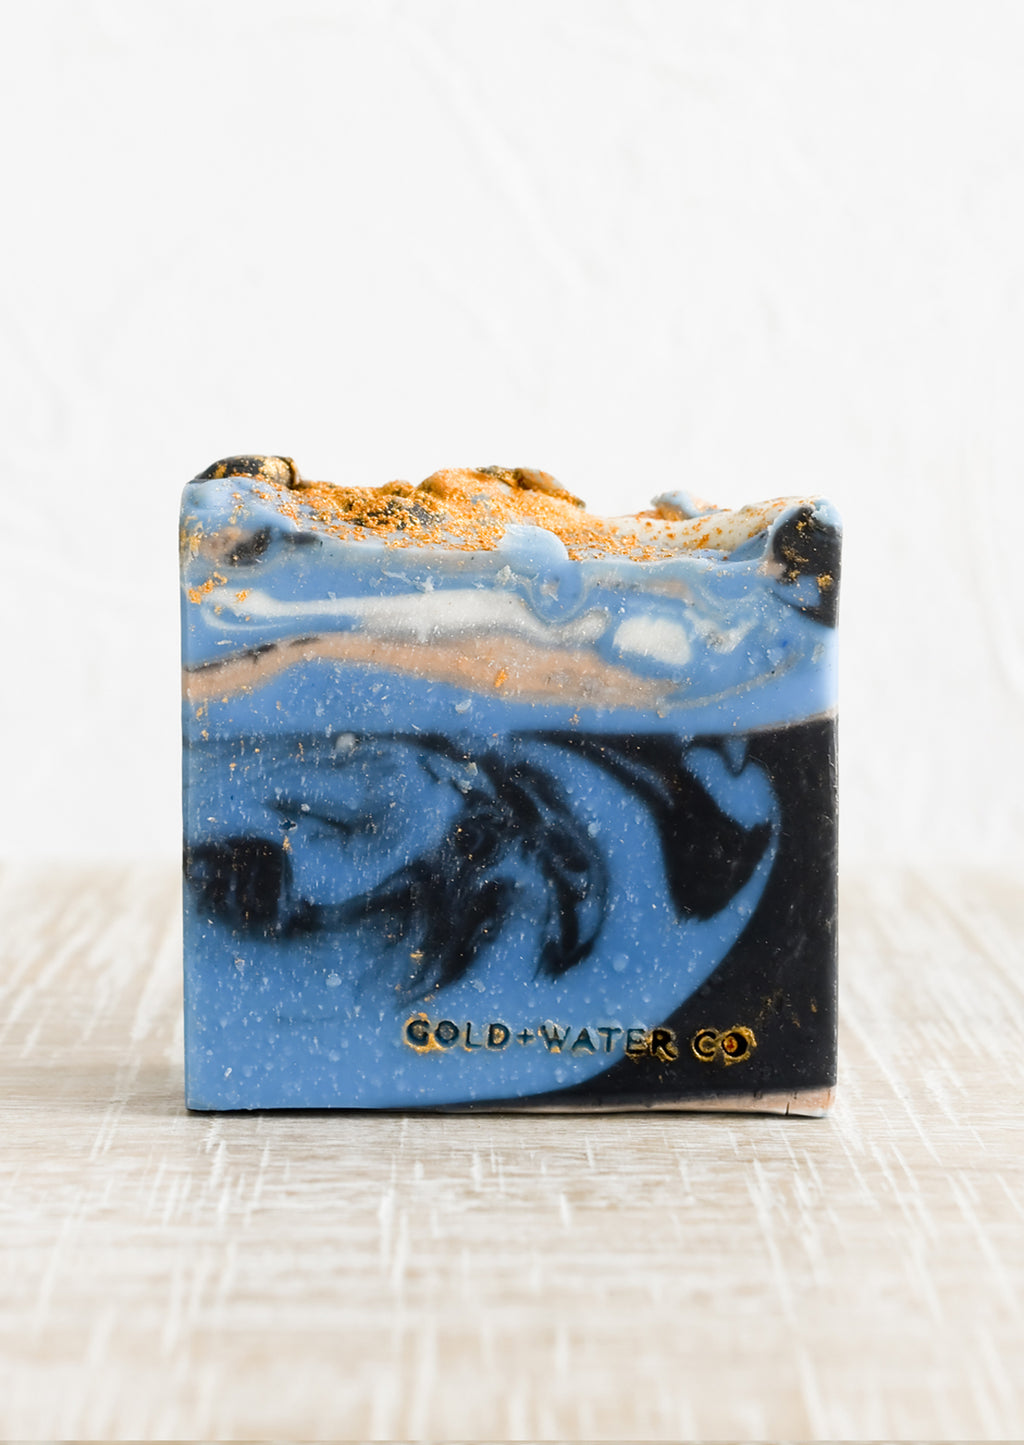 Closer: A bar of soap in blue, gold and black.